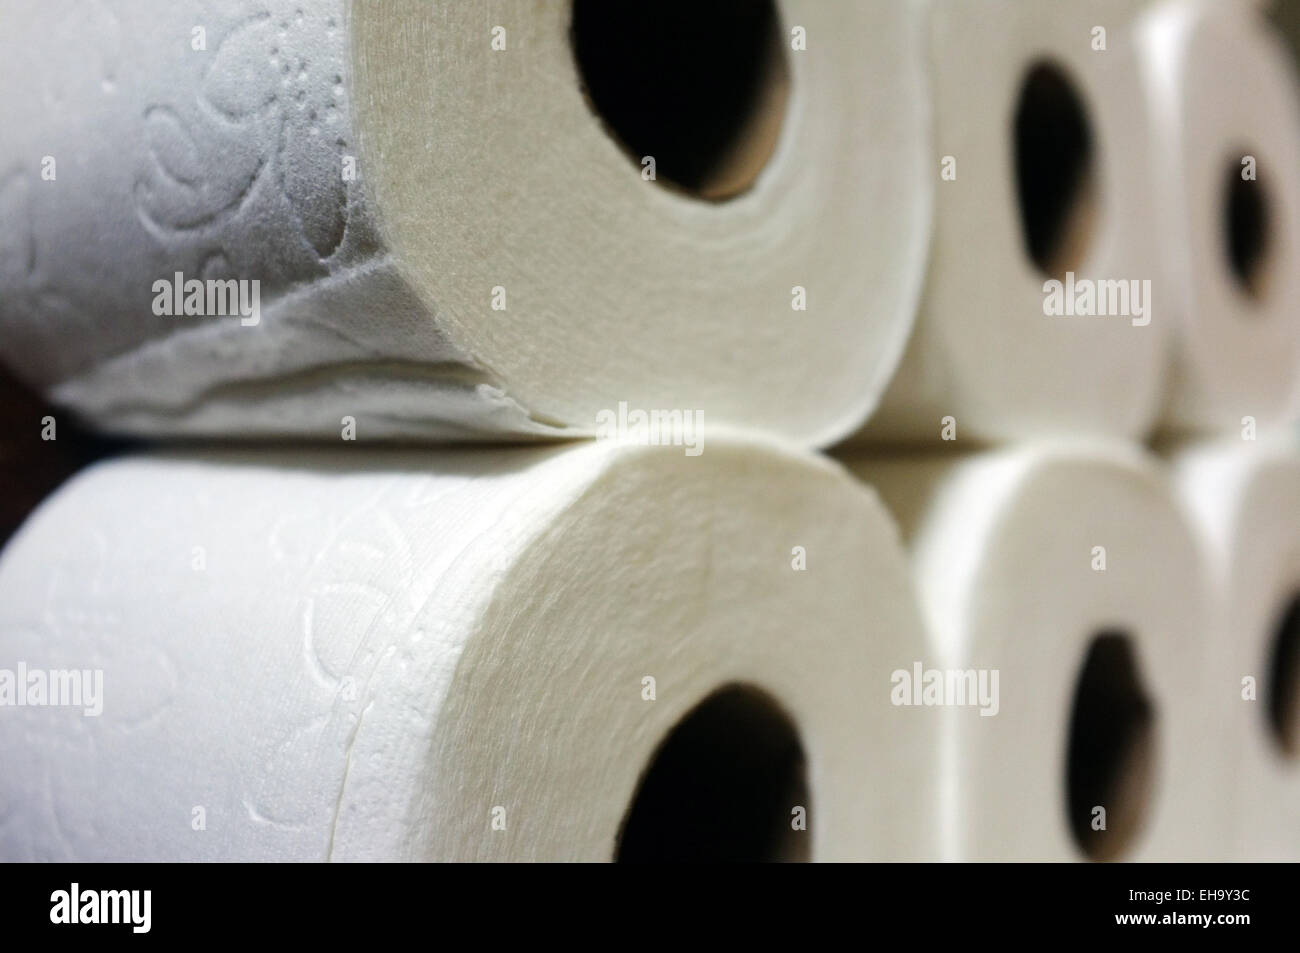 A pile of toilet paper rolls Stock Photo - Alamy